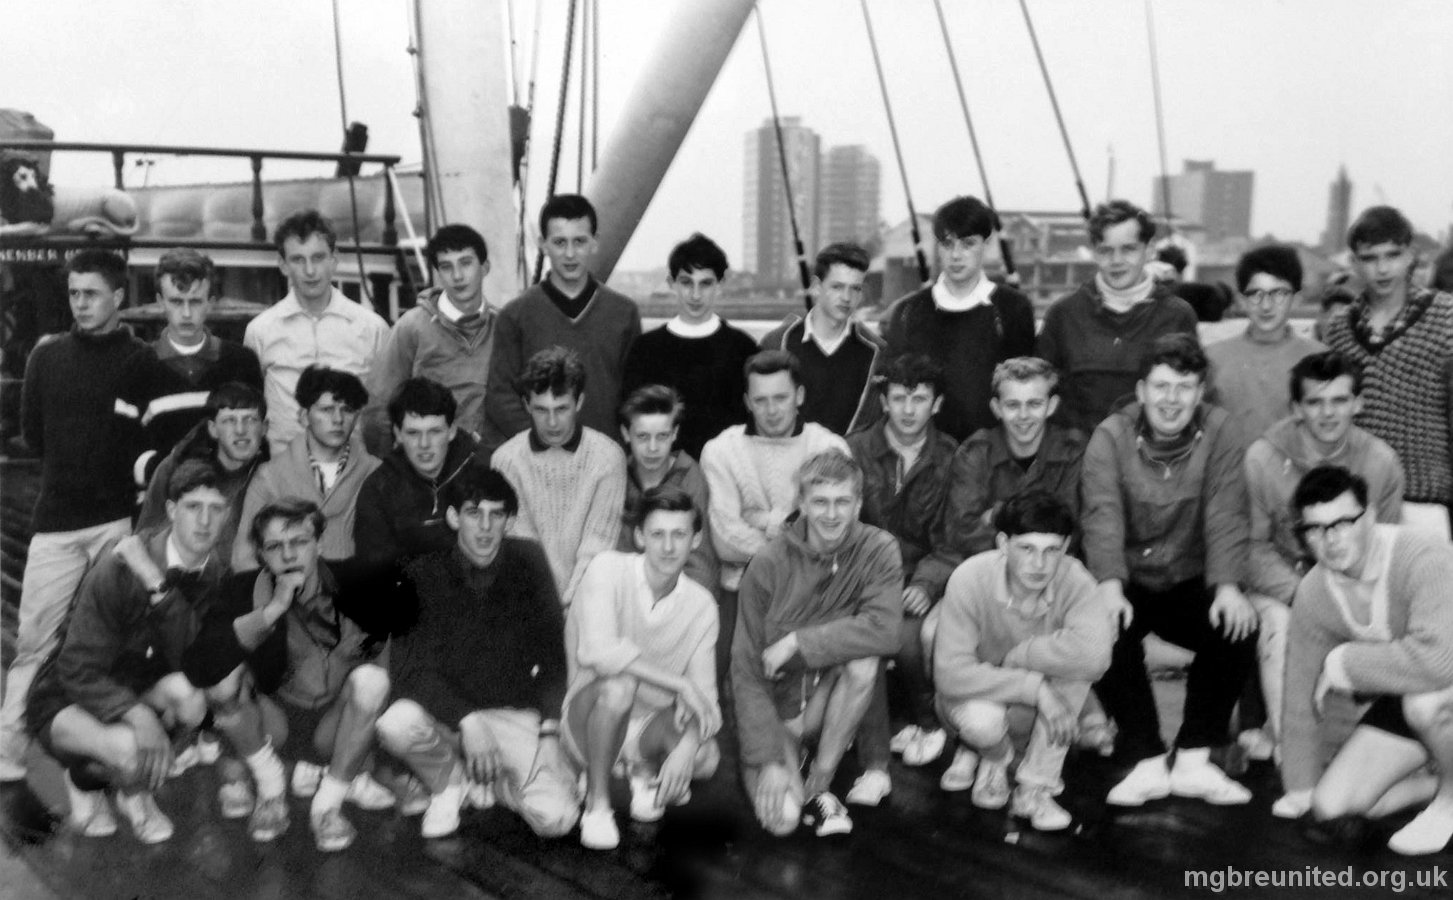 1963 Trip to HMS Foudroyant BACK ROW: 1 Chris Gaulton (Golly) watching the ships, 2 Robert Rutt, 3 ? Townend, 4 Chris Hall (Ozzie), 5 Mick Morrell, 6 Tommy Glanz, 7 ?, 8 Dave Wright, 9 John Pinder, 10 Tony Rouse, 11 Paul Brown. MIDDLE ROW :1 ?, 2 ?, 3 Trevor Vickers, 4 Ray Scott, 5 ? Green, 6 Mr Clarke, 7 Dave Waldron (Wally), 8 Roy Davies (Great Footballer), 9 John Fletcher (Fletch), 10 Allan Woodiwiss, FRONT ROW: 1 Annesley Clifford, 2 Adrian Foulkes, 3 Richard Smith (Smiffy), 4 ?, 5 David Fountain, 6 Dave Holland (Holly), 7 ?.